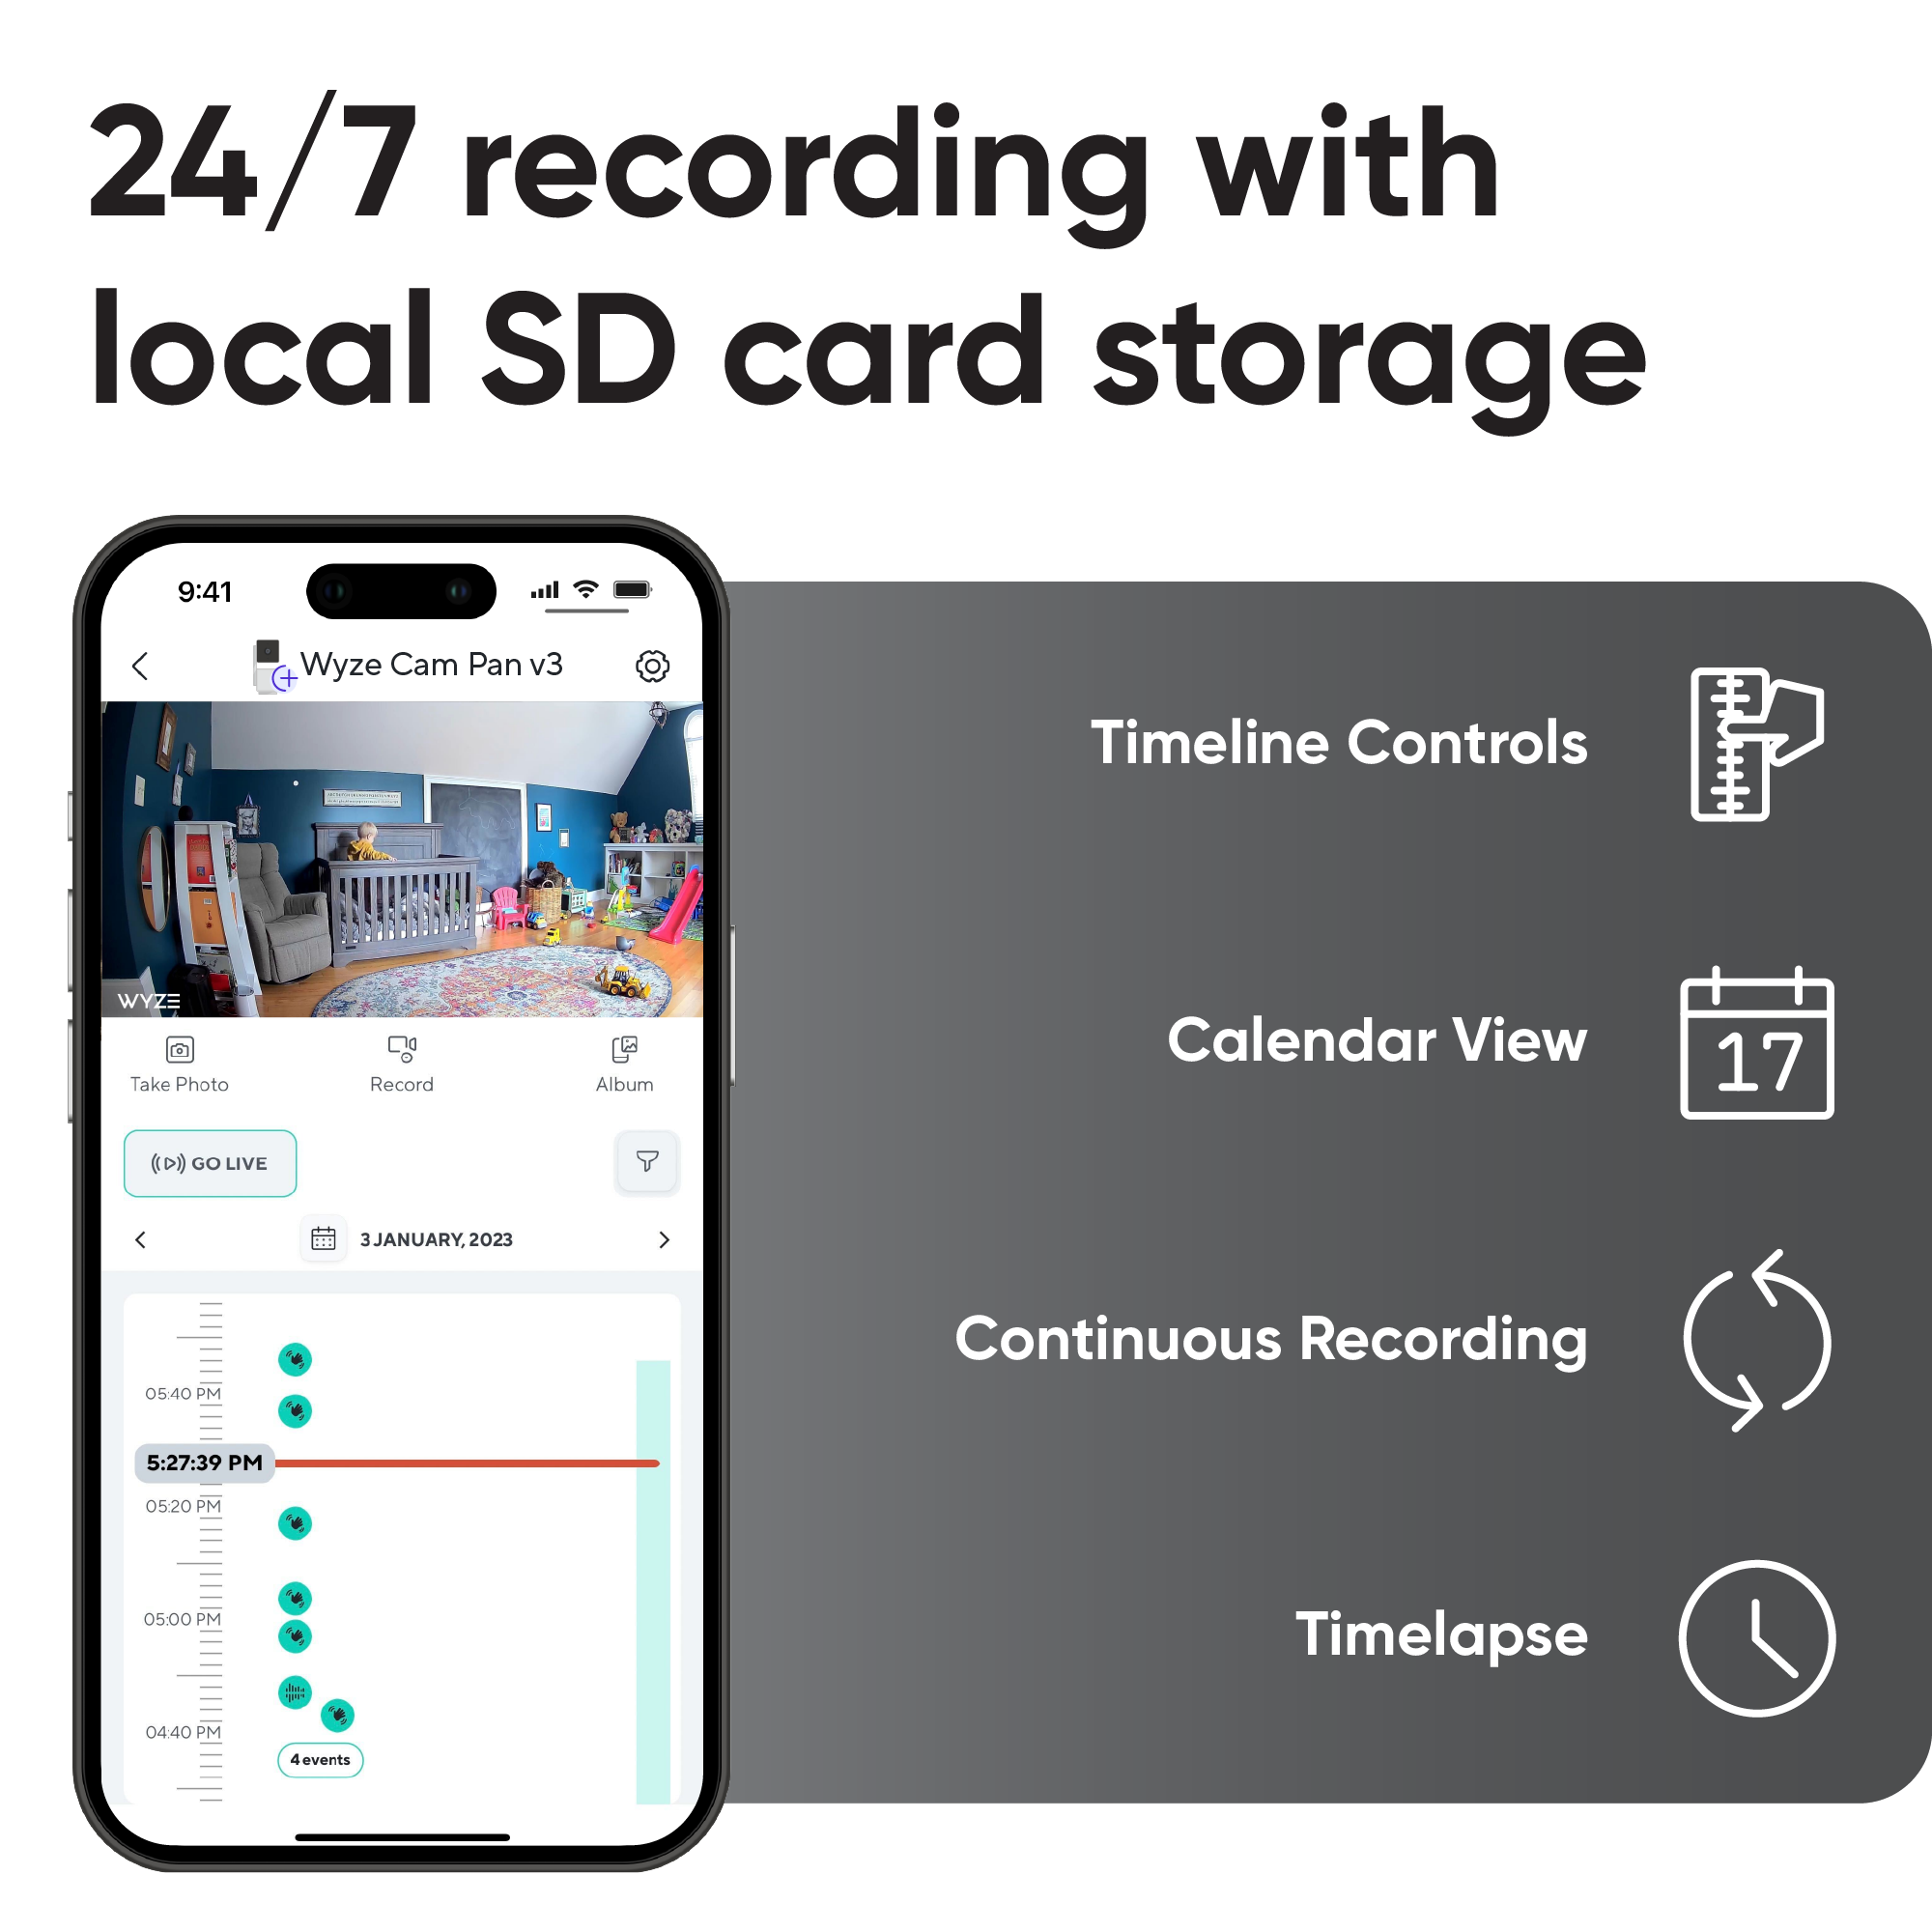 Smartphone with Wyze App open. Text overlay that says "24/7 recording with local SD card storage."